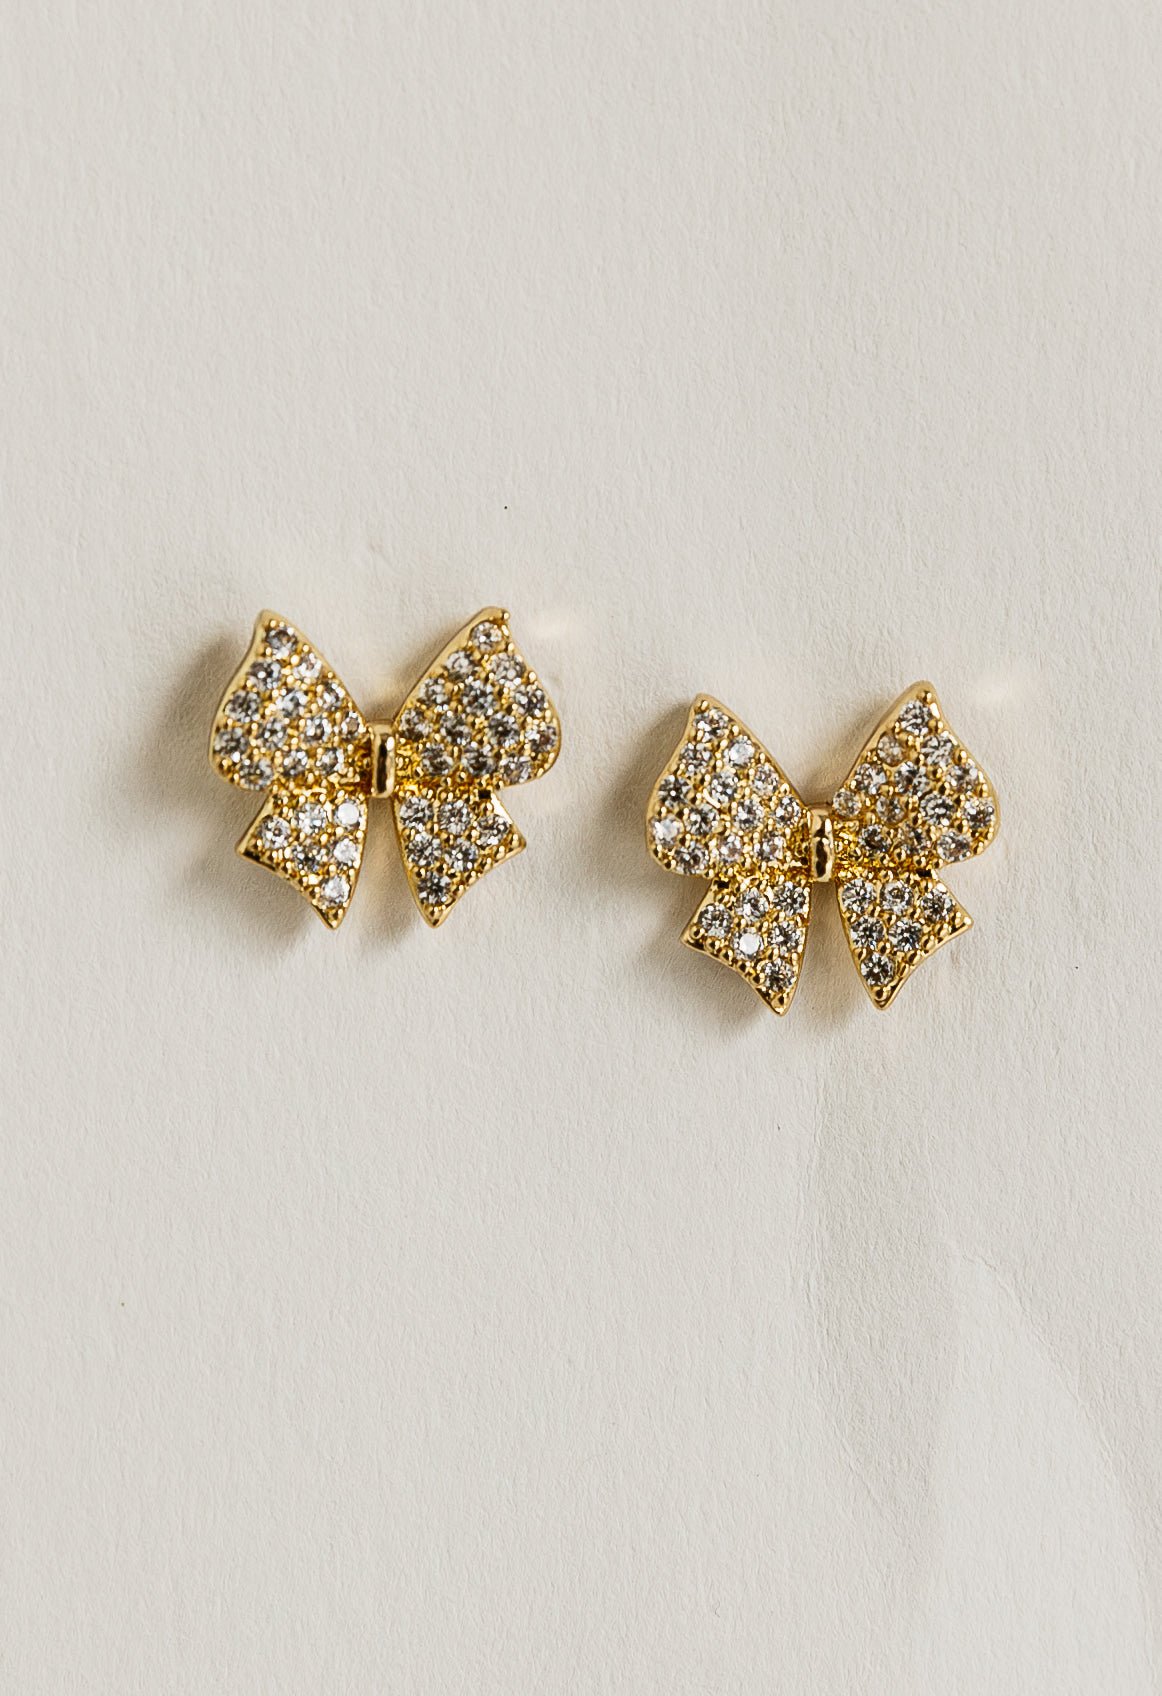 Peggy Earrings - GOLD - willows clothing Earrings